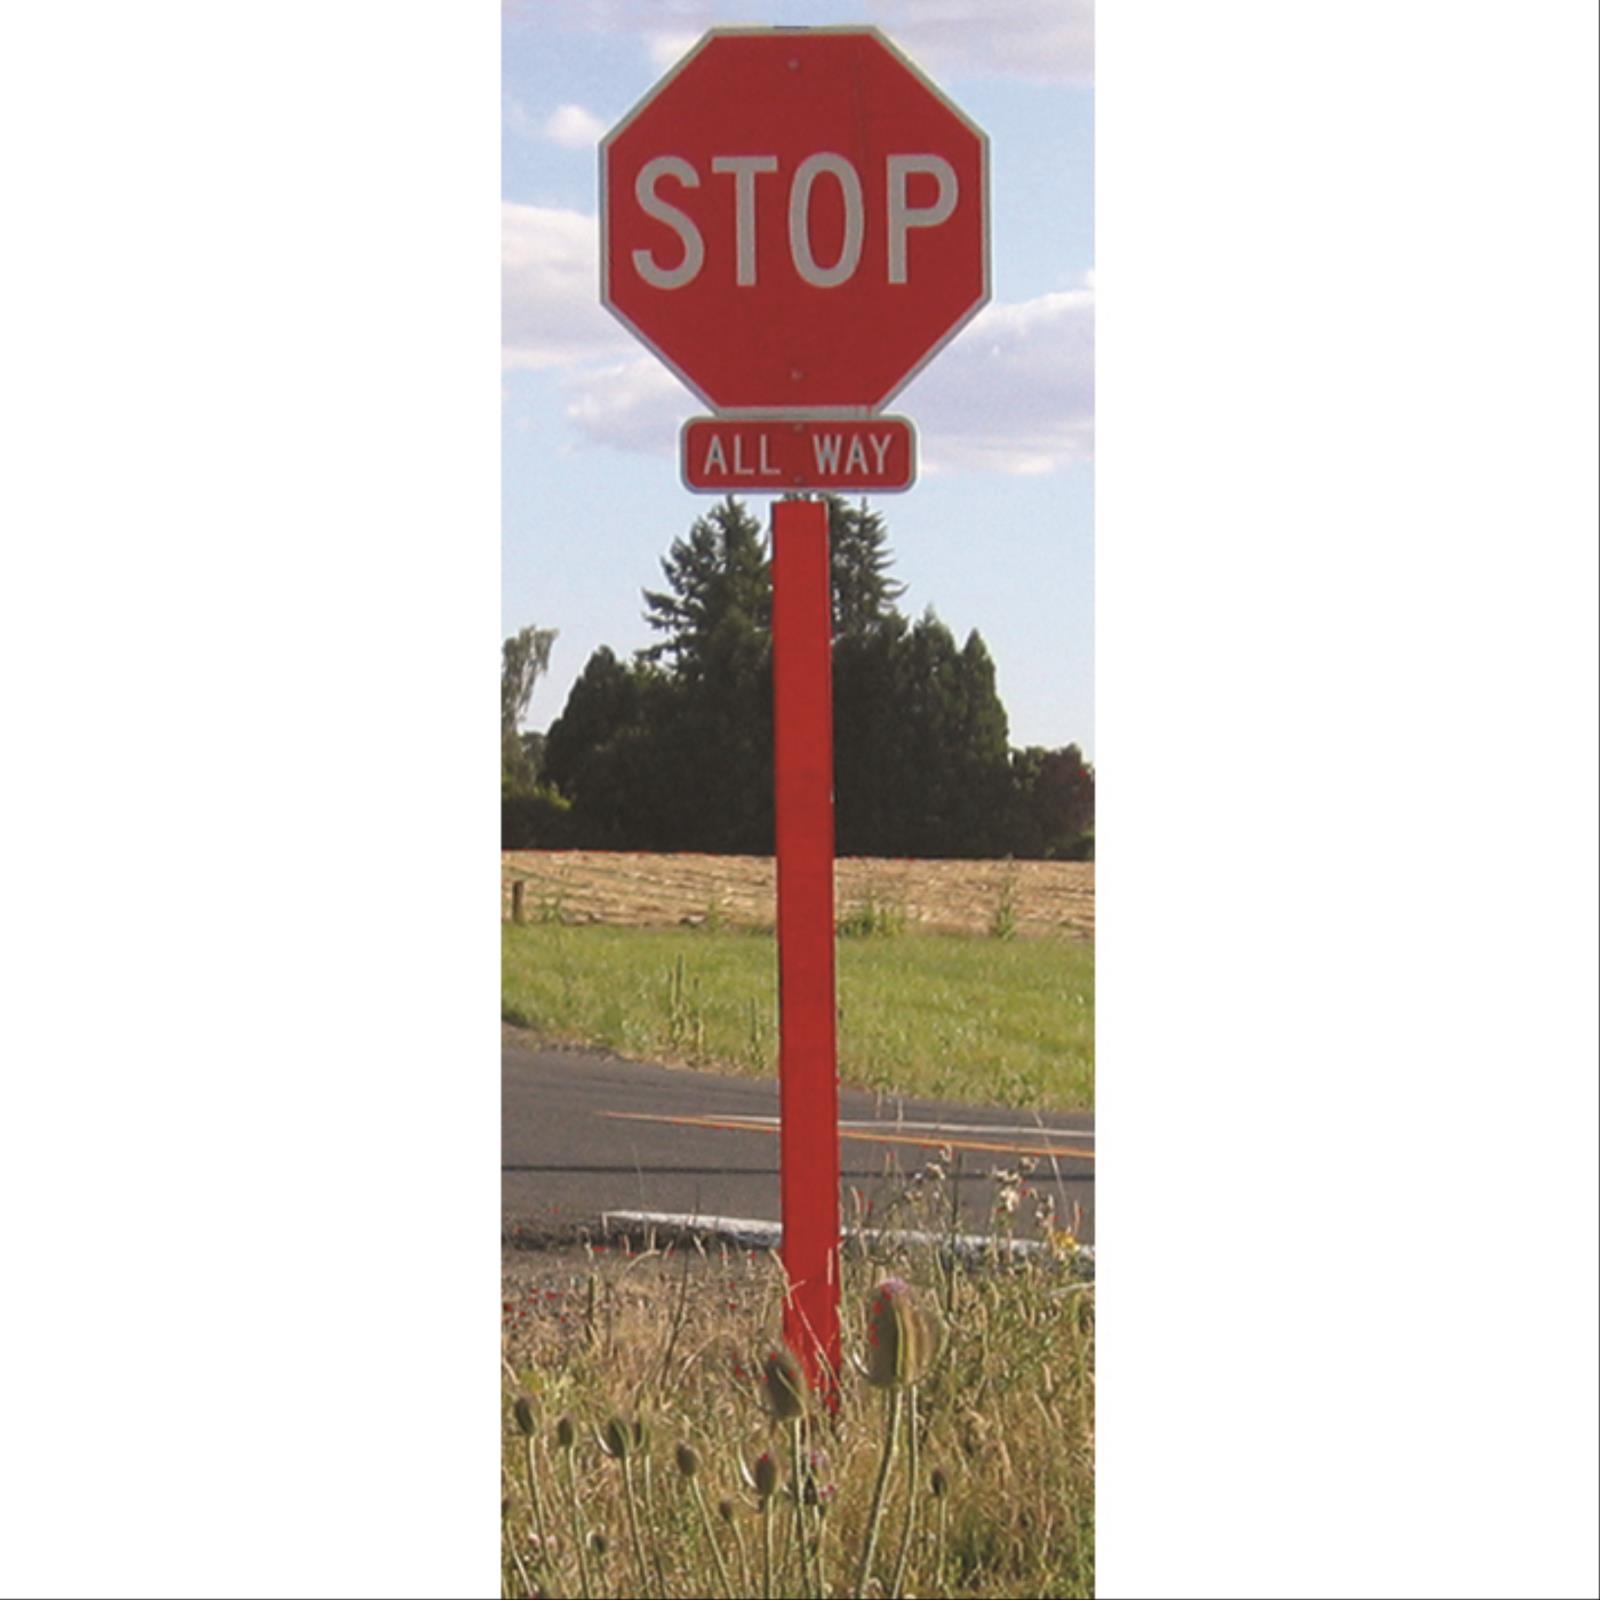 Sign Post Reflector Covers